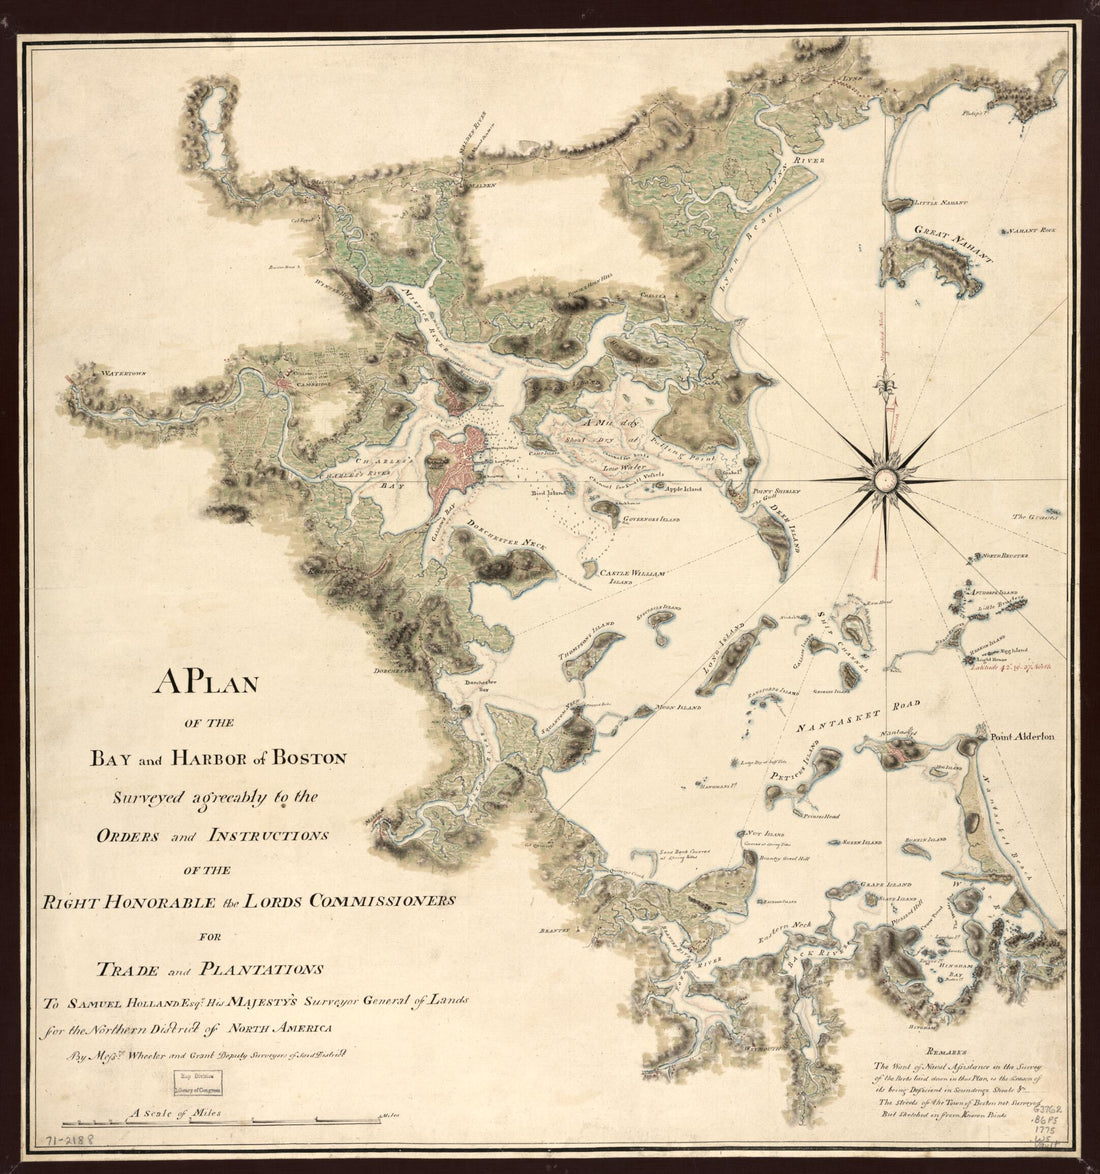 This old map of A Plan of the Bay and Harbor of Boston, Surveyed Agreeably to the Orders and Instructions of the Right Honorable the Lords Commissioners for Trade and Plantations, to Samuel Holland, Esqr., His Majesty&